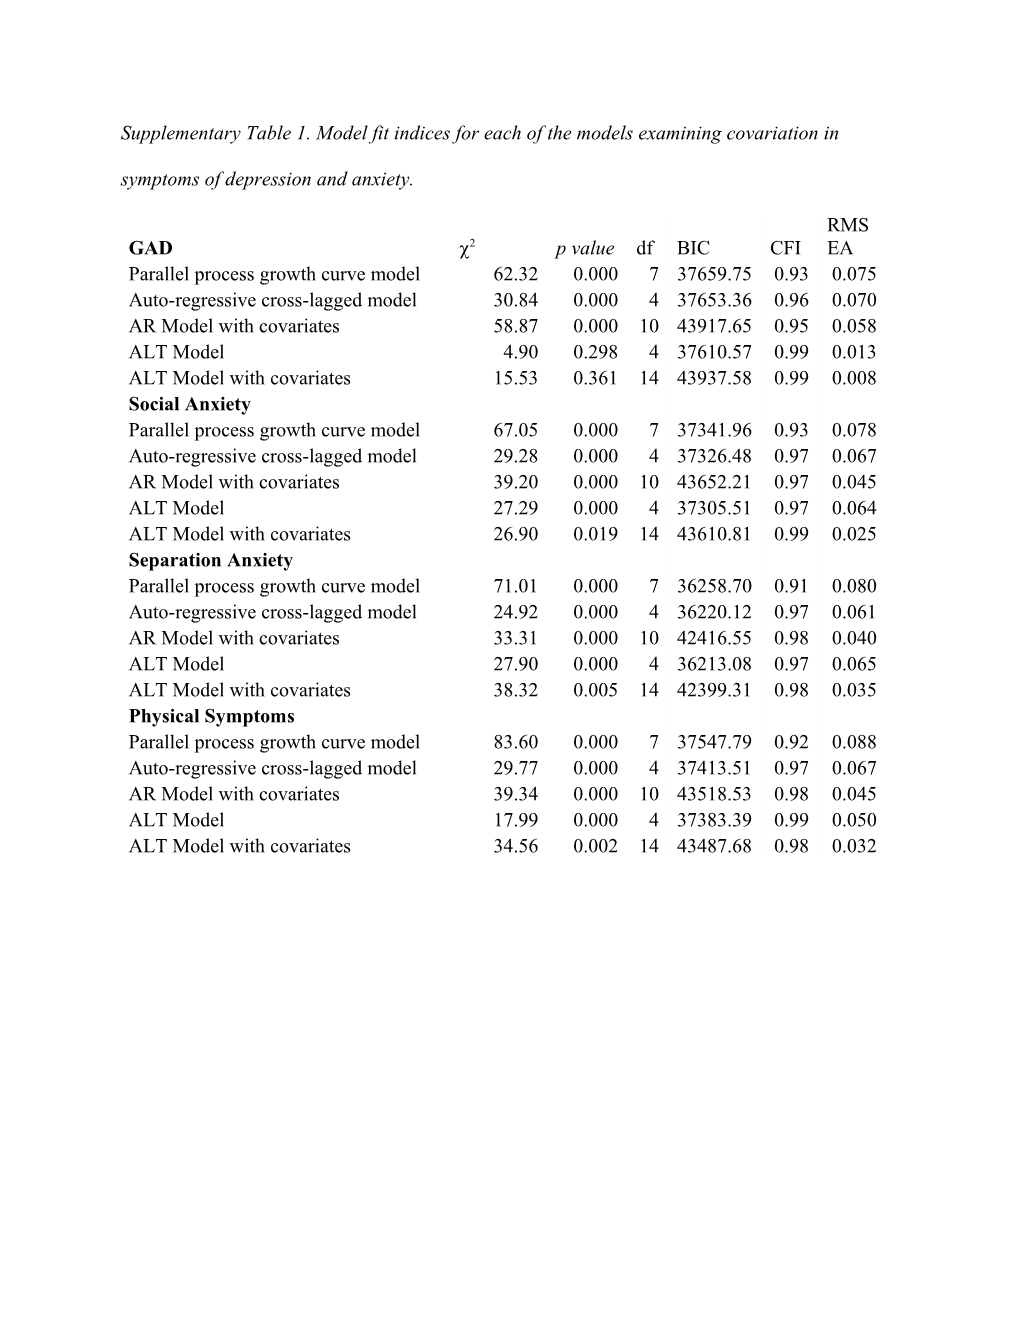 Supplementary Table 1. Model Fit Indices for Each of the Models Examining Covariation